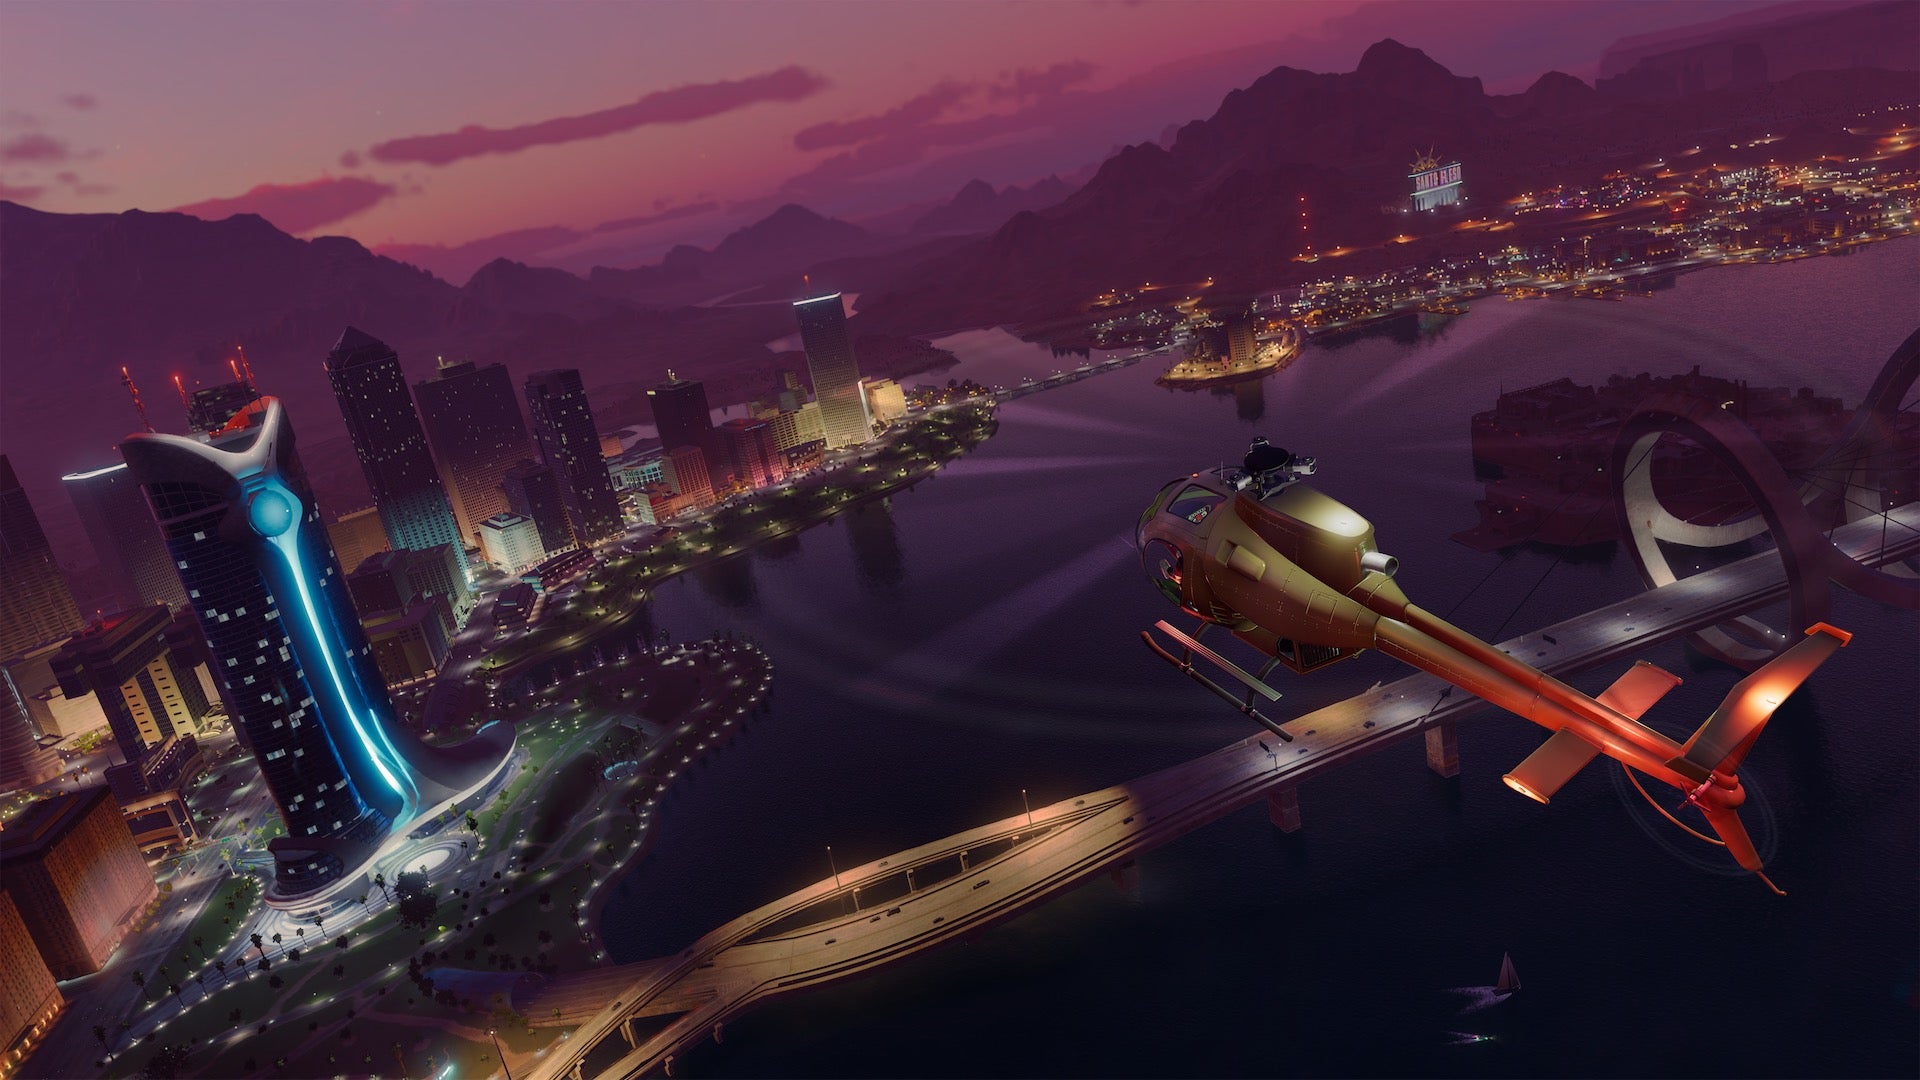 A helicopter flies over the city at night in Saints Row.